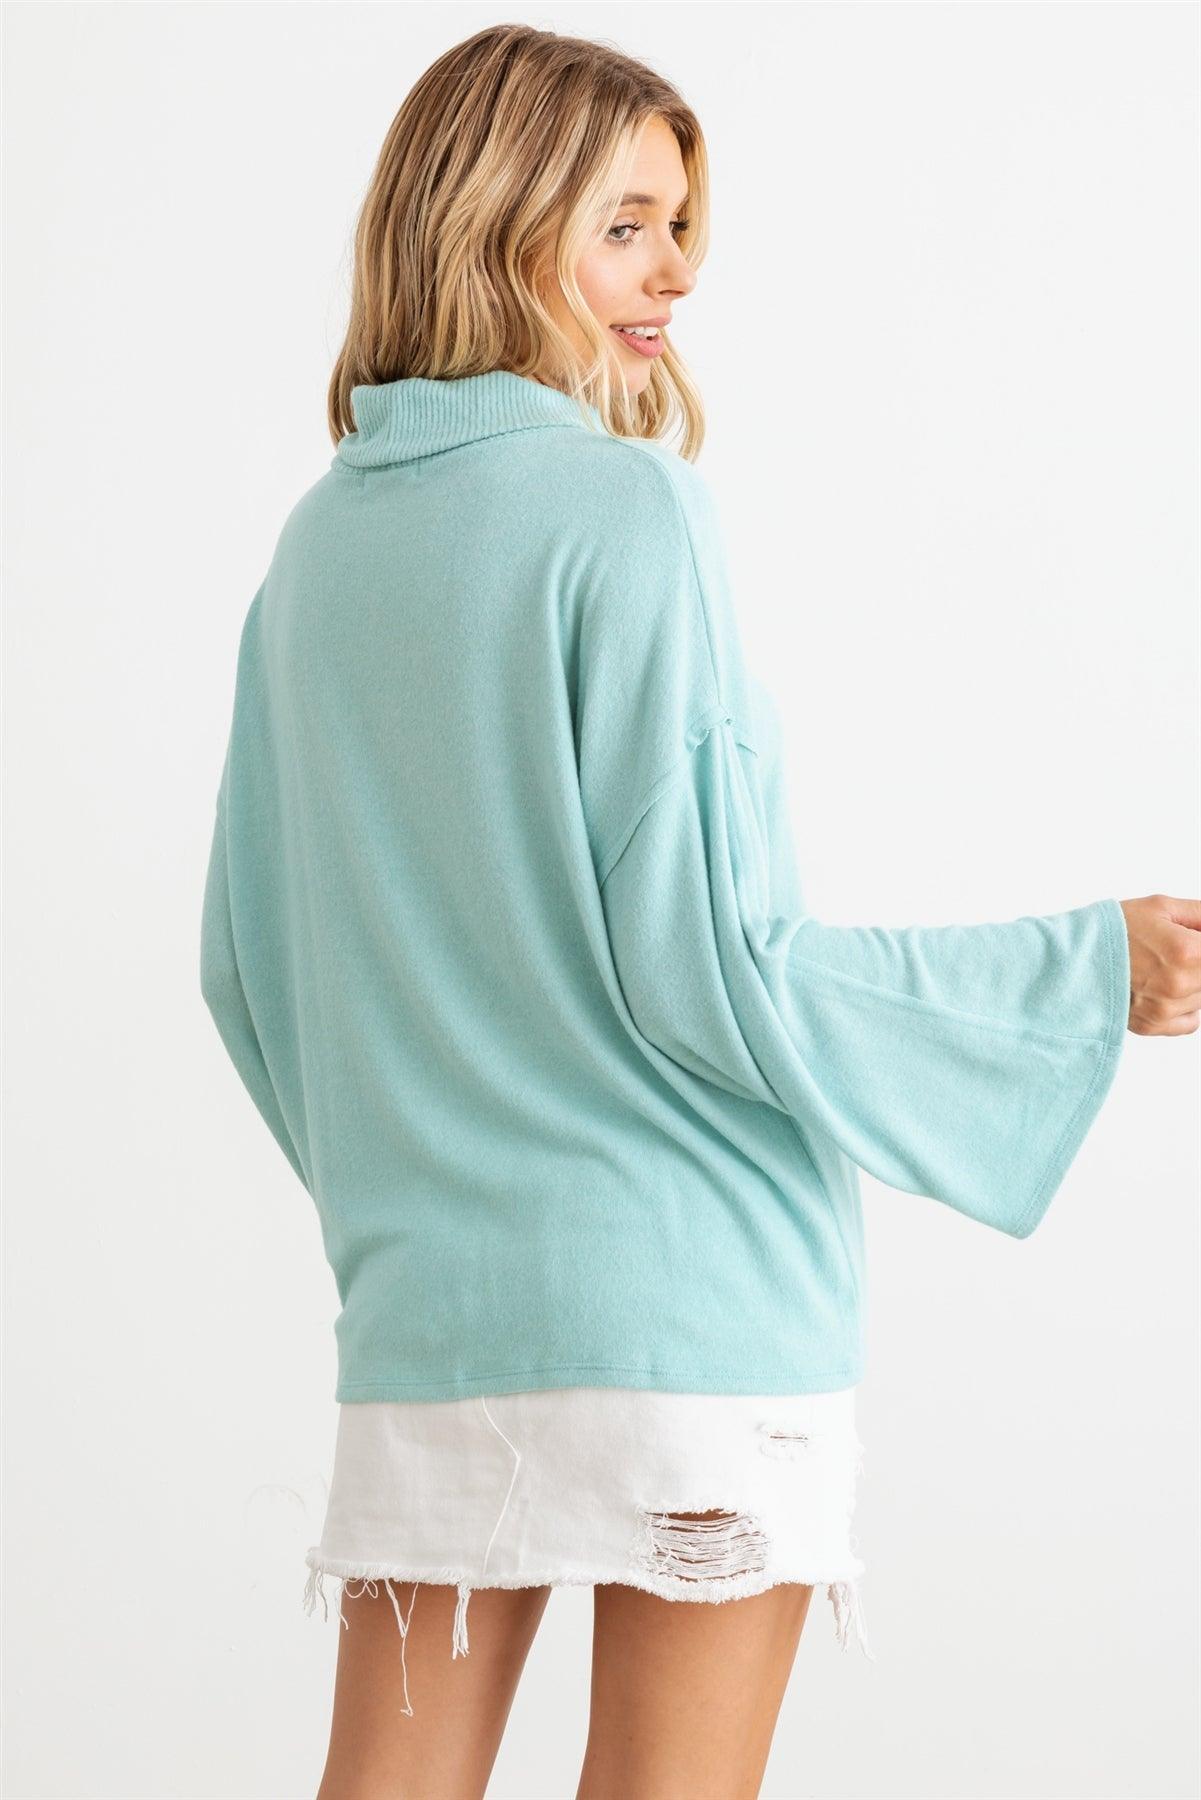 Aqua Turtle Neck Long Sleeve Soft To Touch Top 2